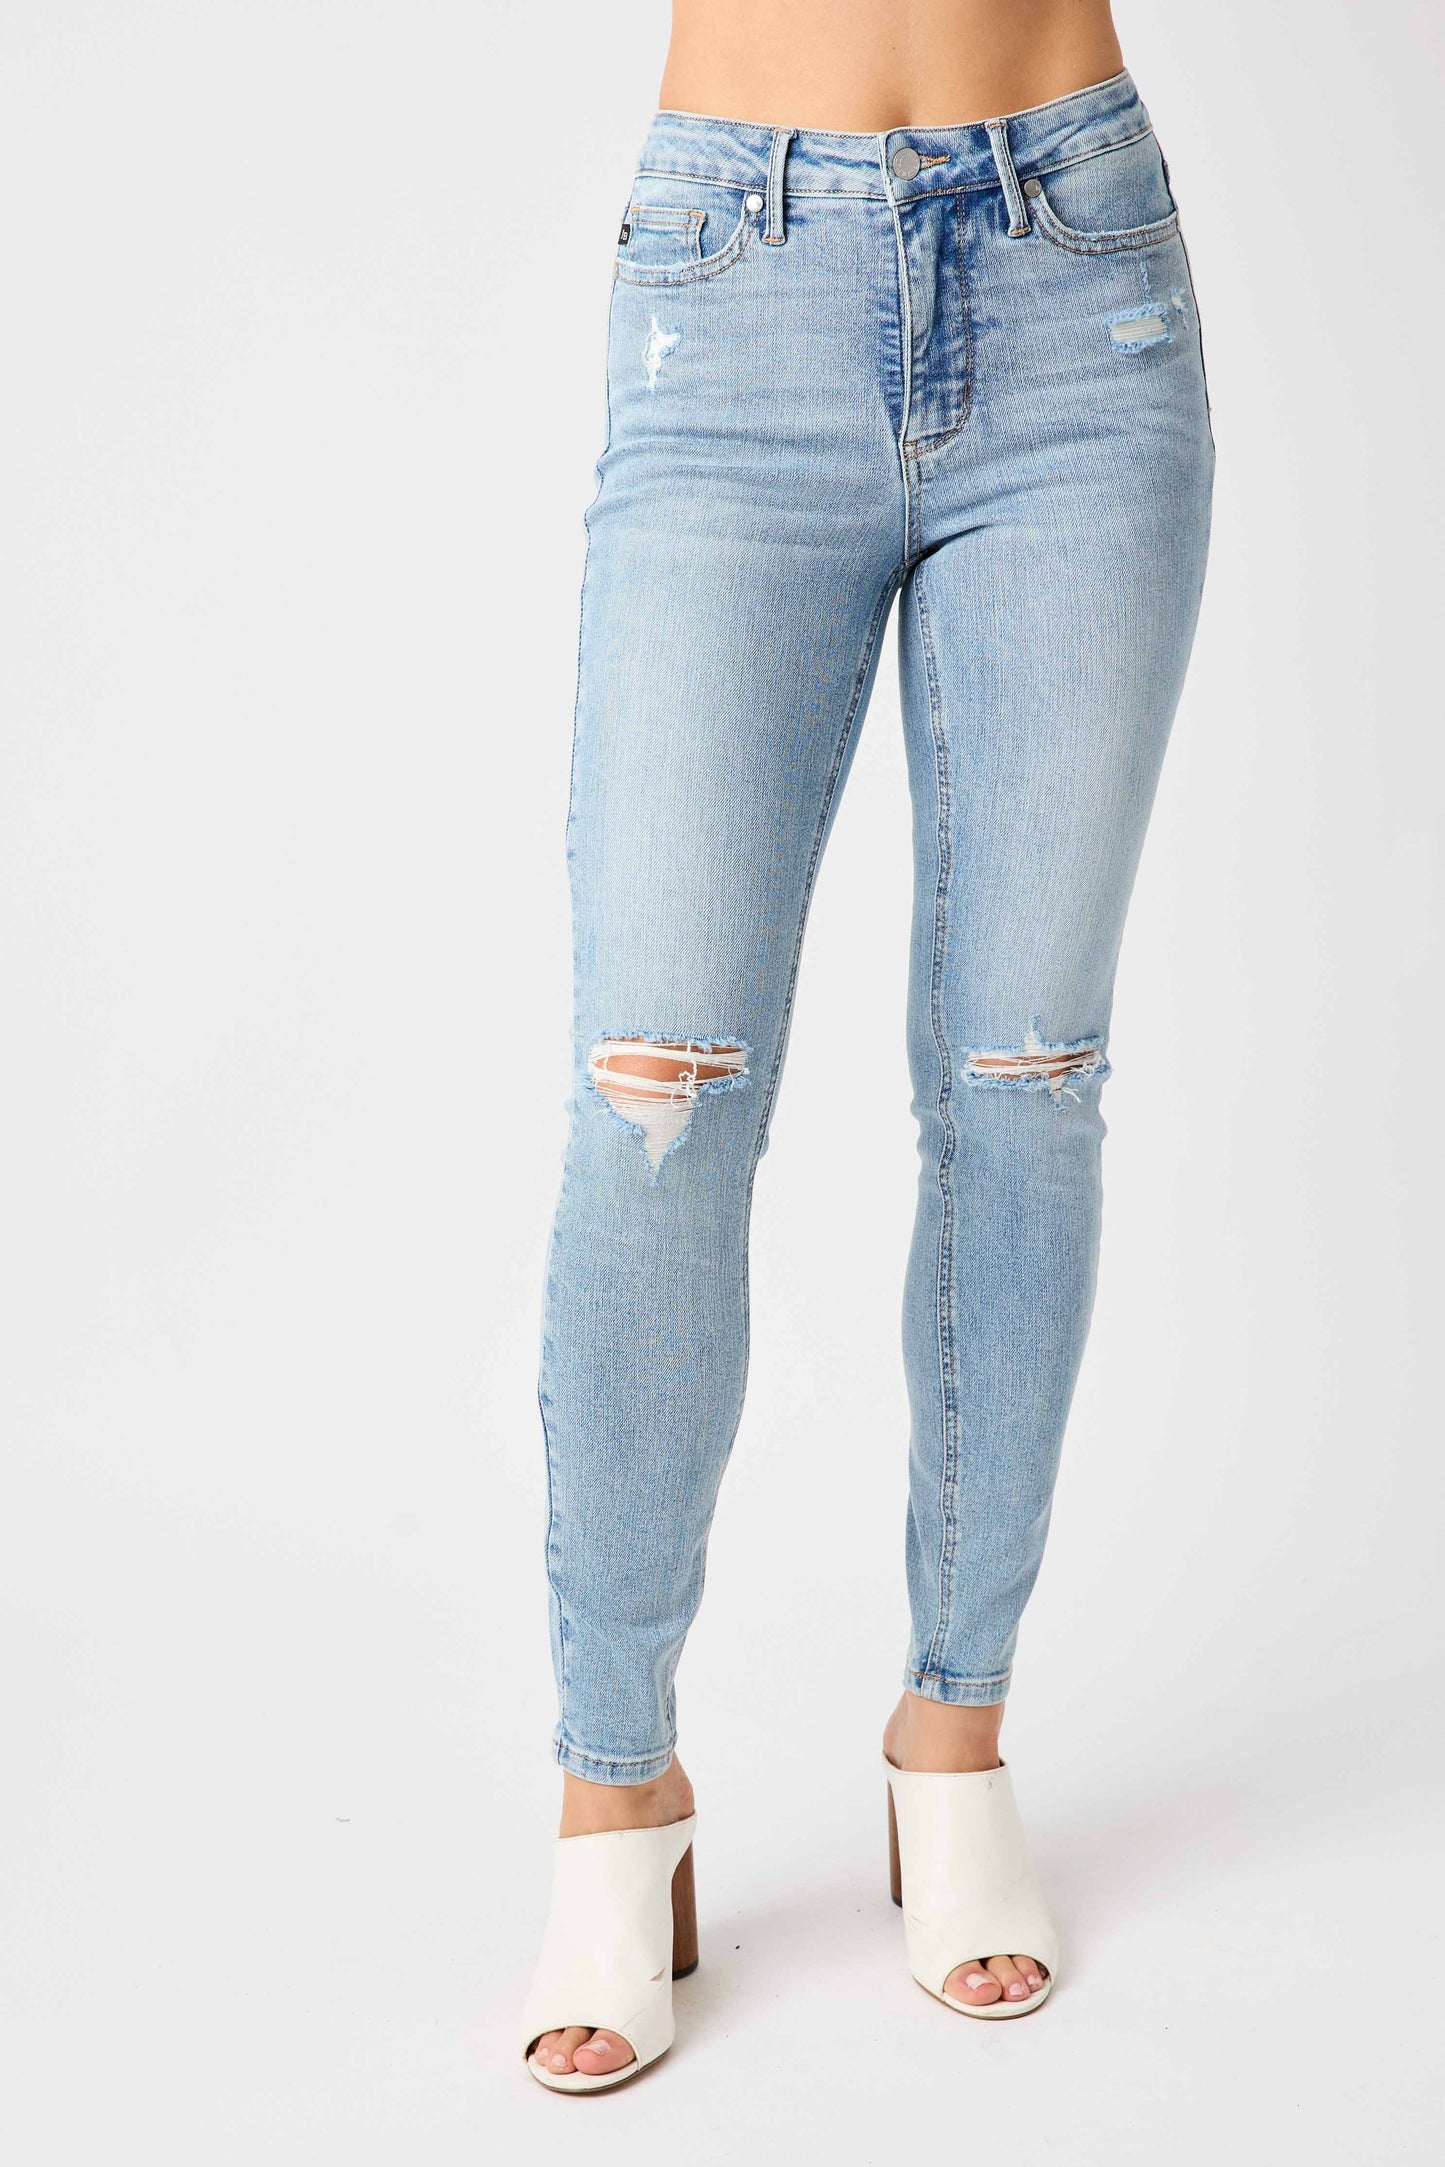 "Hold On" Tummy Control Jeans